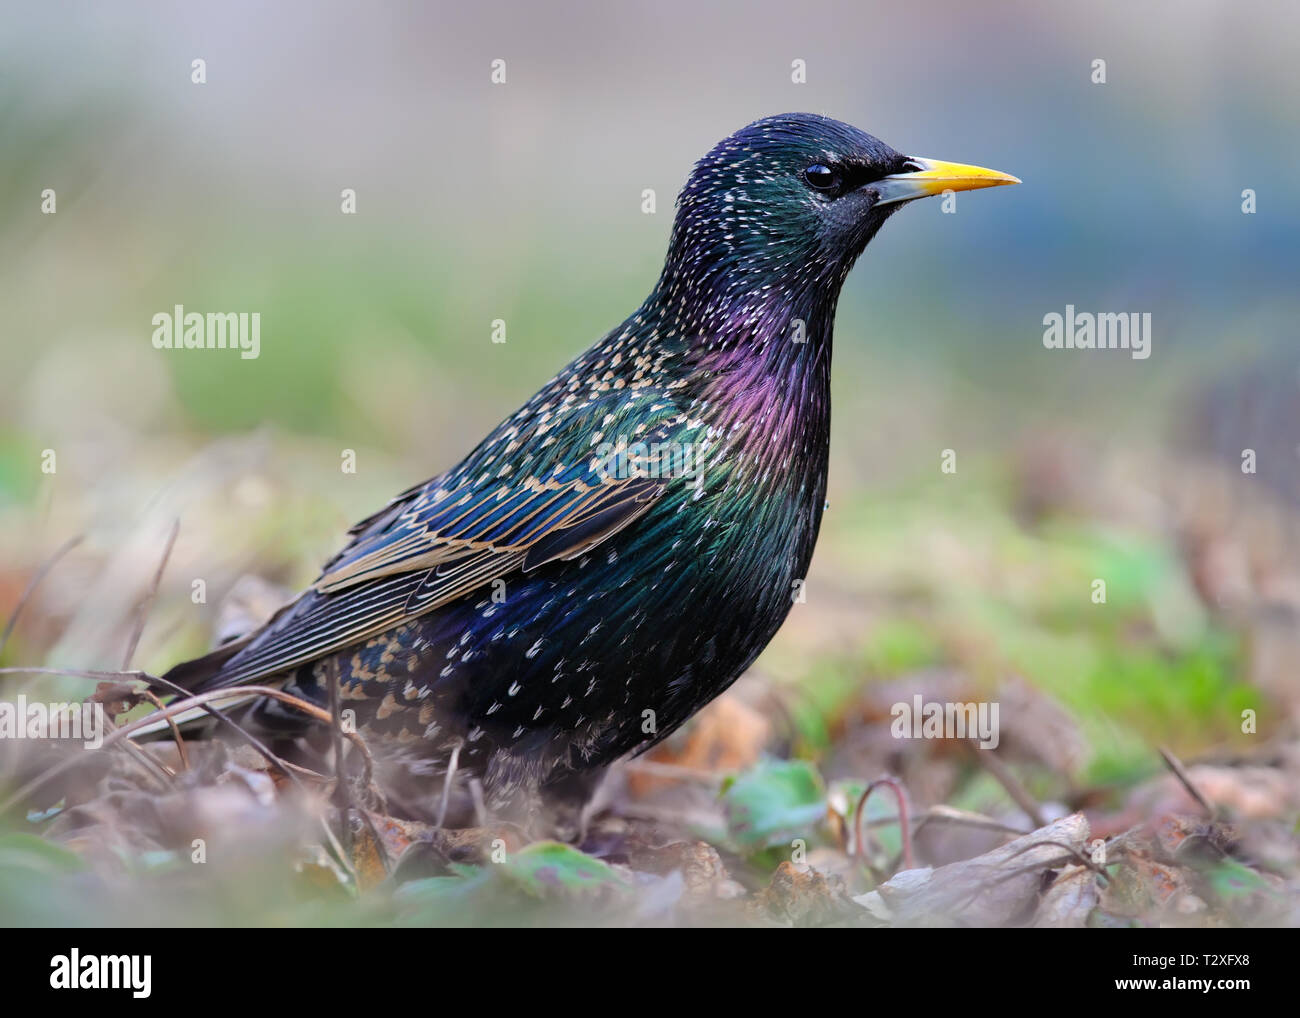 Shining Common Starling posing in the grass Stock Photo